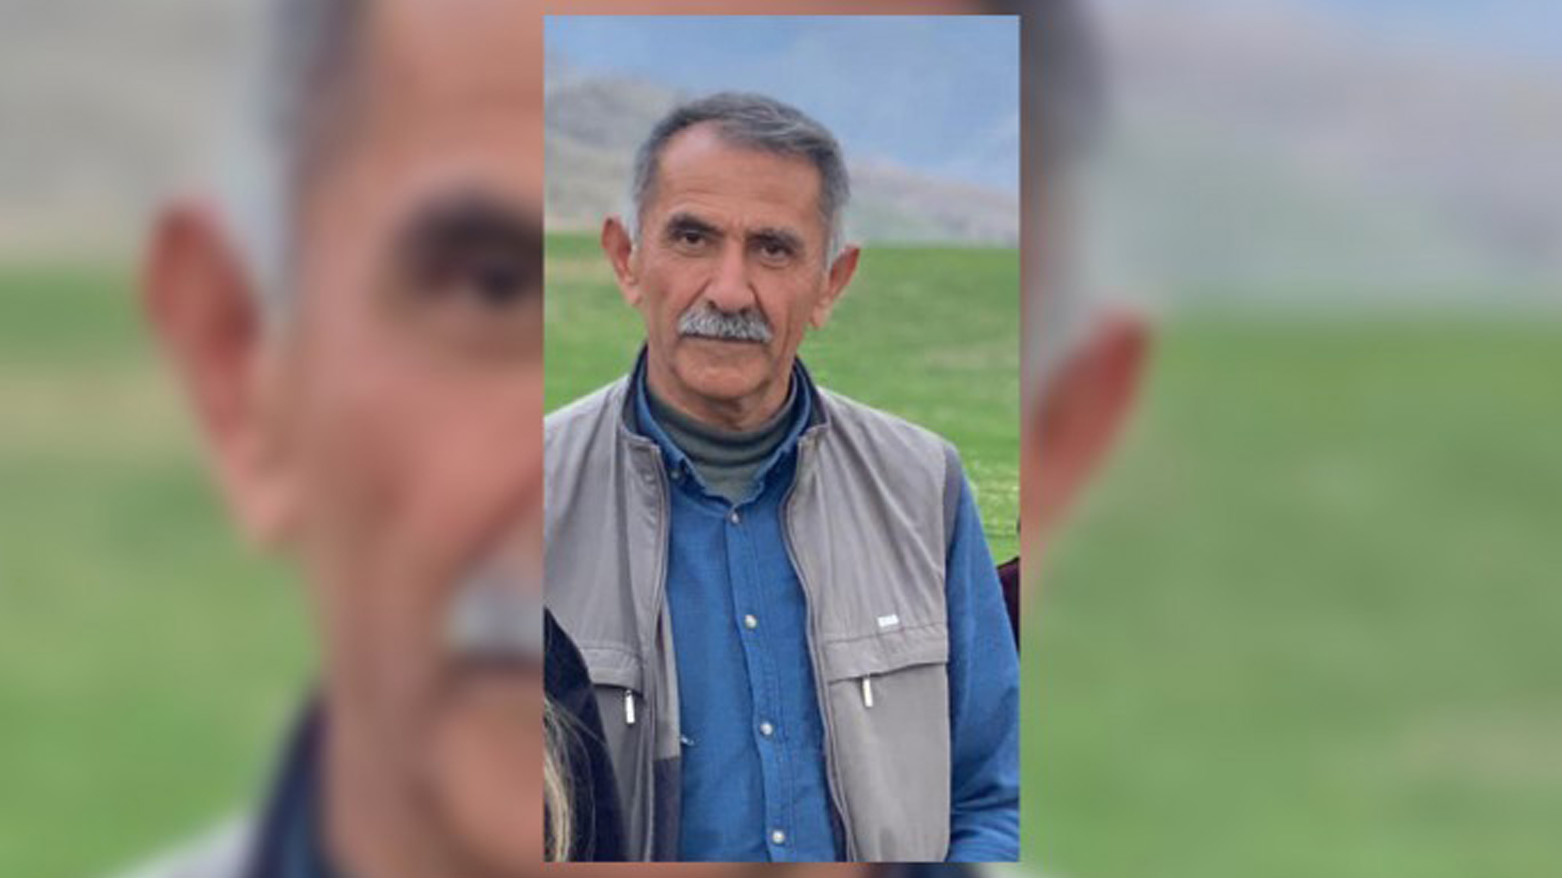 Ahmet Gün, a local executive of the pro-Kurdish Peoples' Equality and Democracy (DEM) Party, was killed (Photo: Mezopotamya Agency).